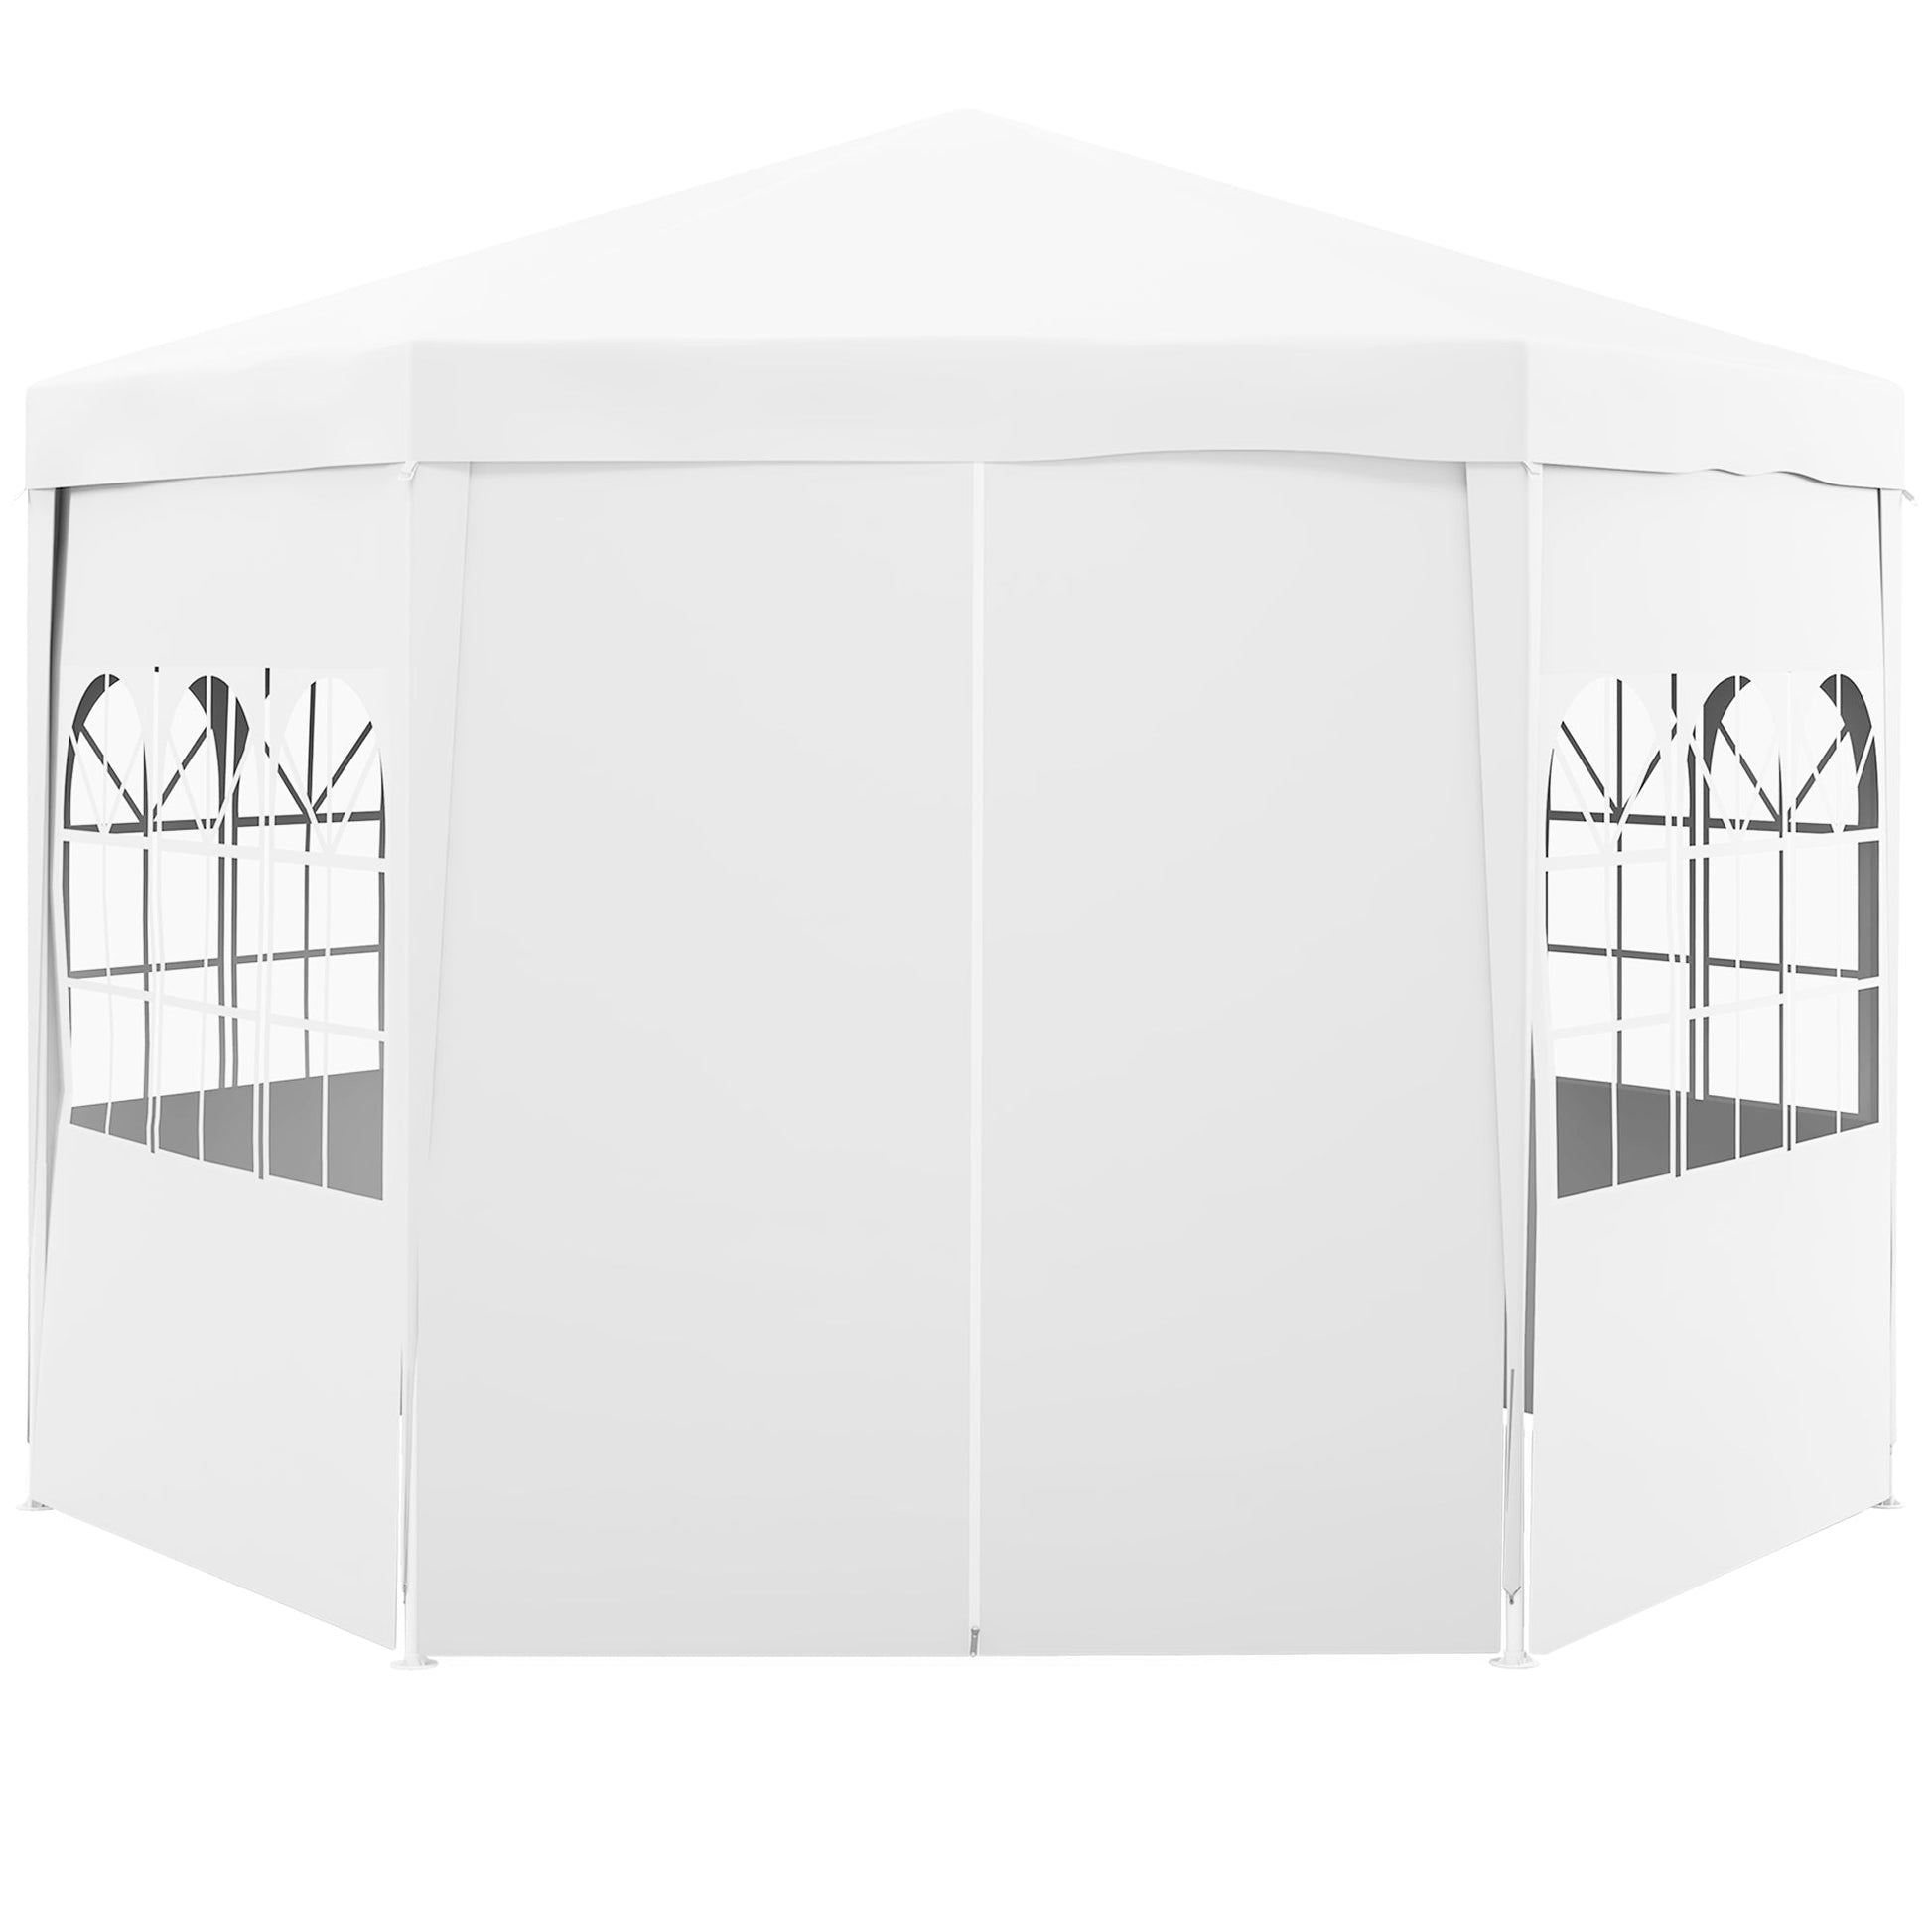 13 ft Party Tent Wedding Gazebo Outdoor Waterproof PE Canopy Shade with 6 Removable Side Walls at Gallery Canada